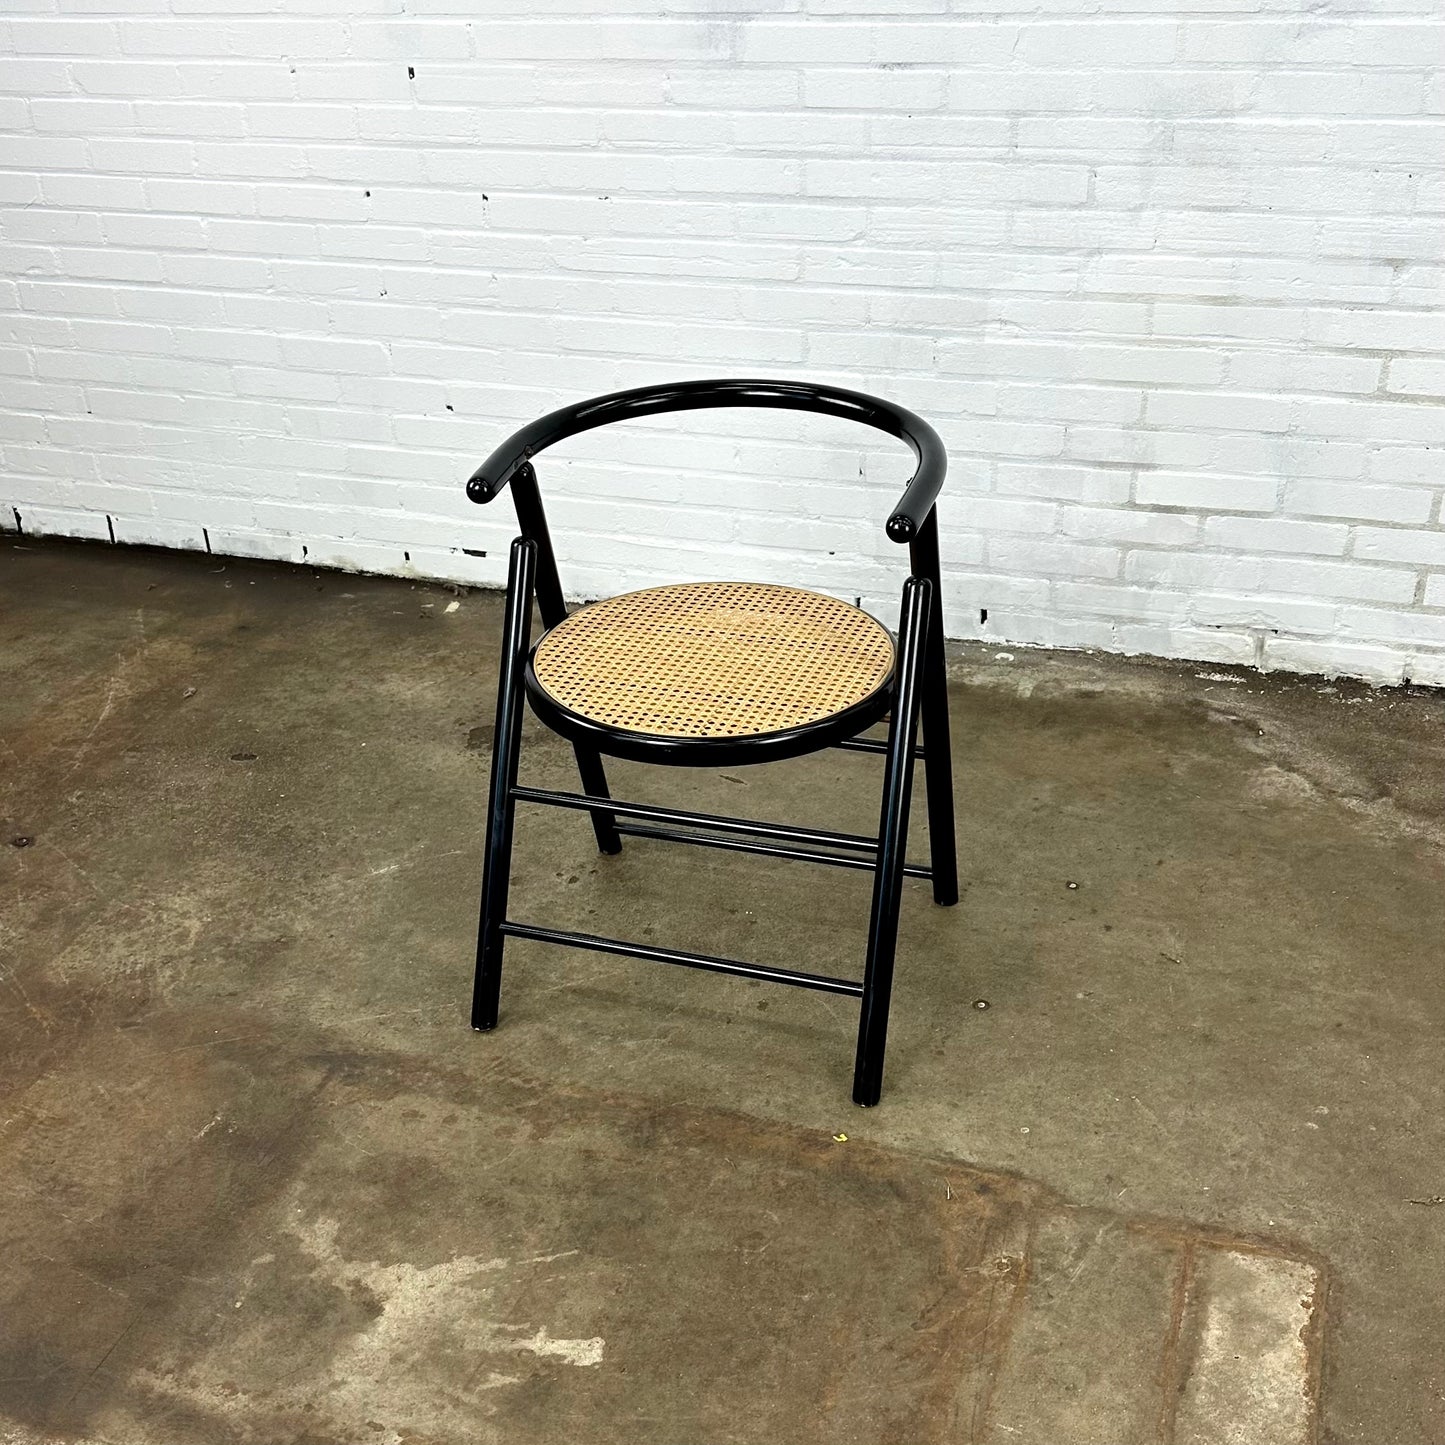 Vintage folding chair with rattan